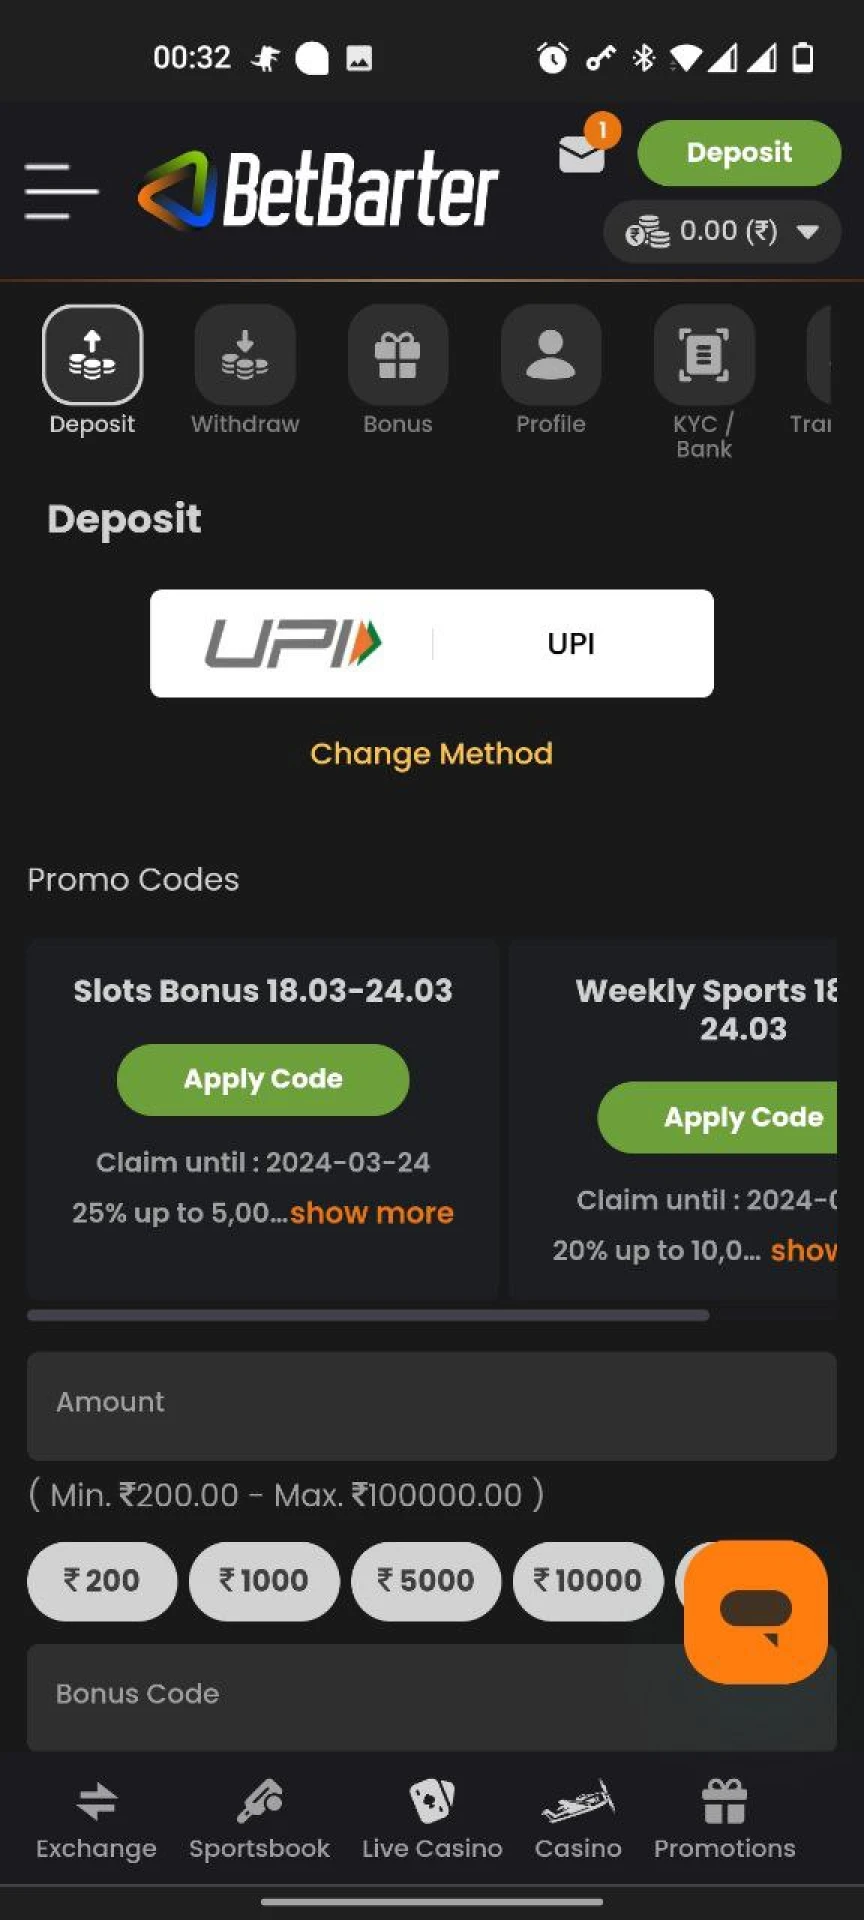 Fund your BetBarter deposit to bet on live IPL events.